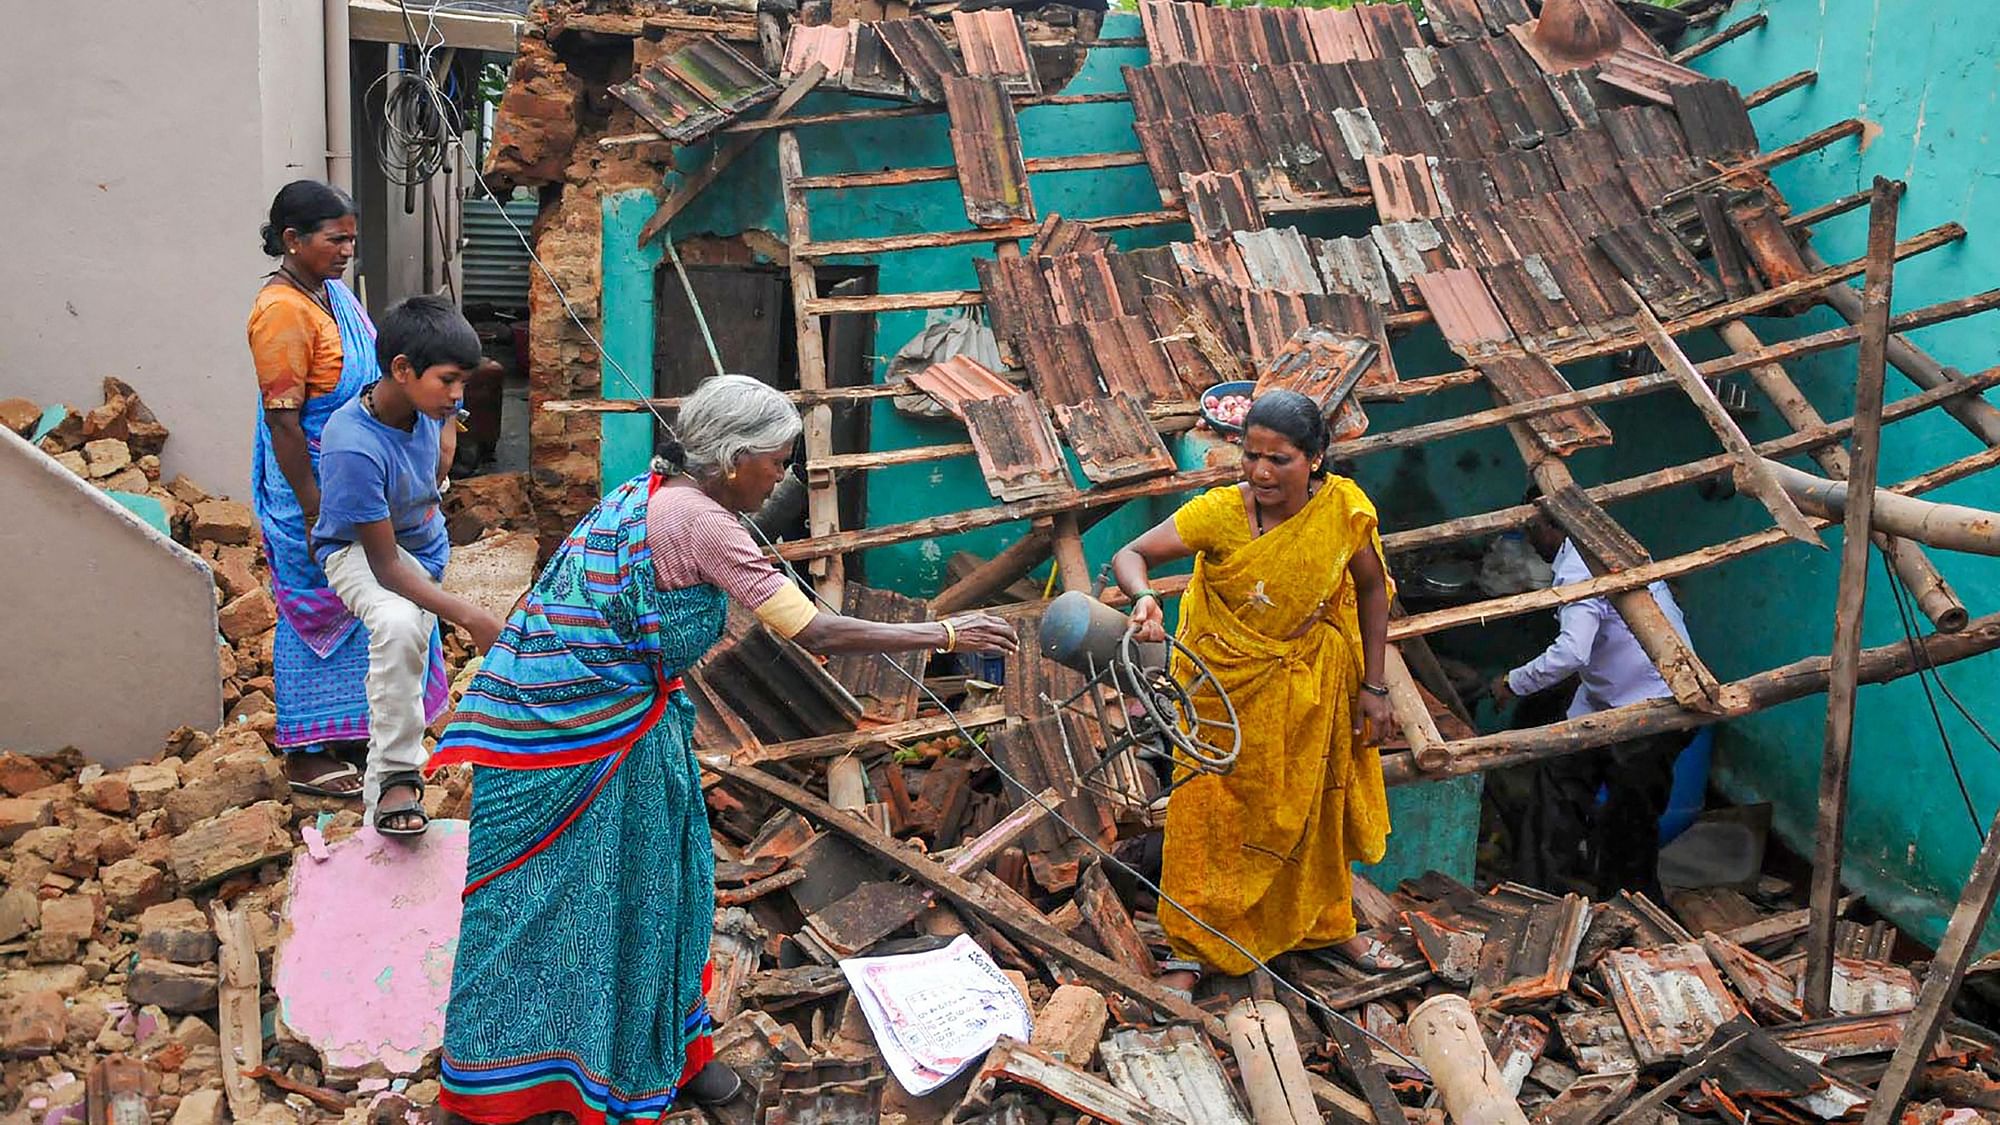 Residents salvage their household items after a house collapsed following rains, in Chikmagalur district of Karnataka.